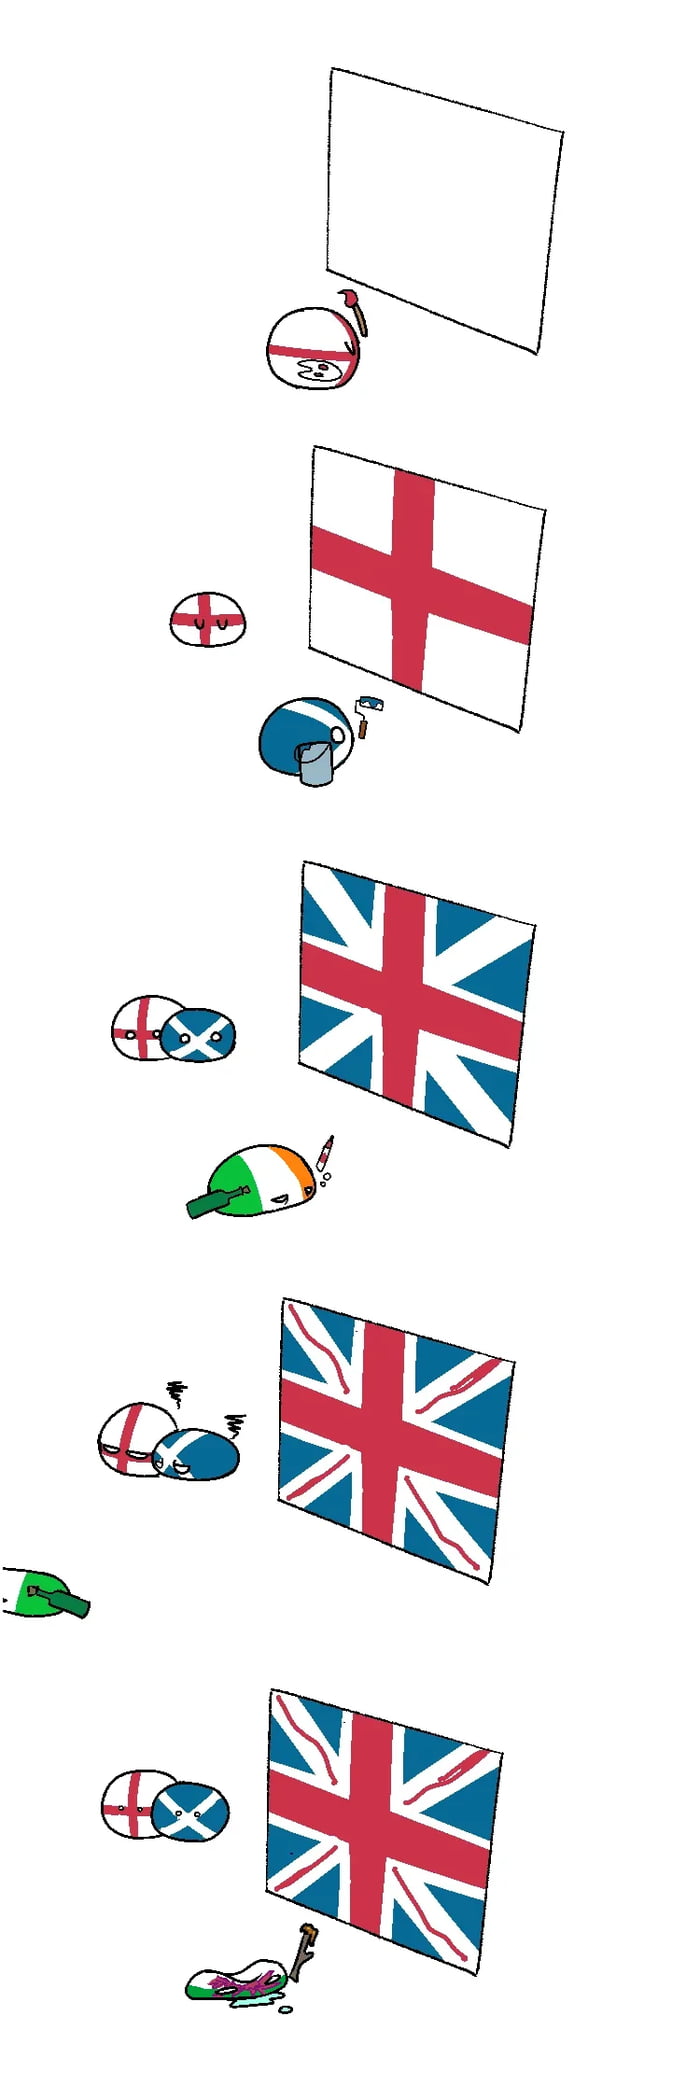 How the Union Jack came about